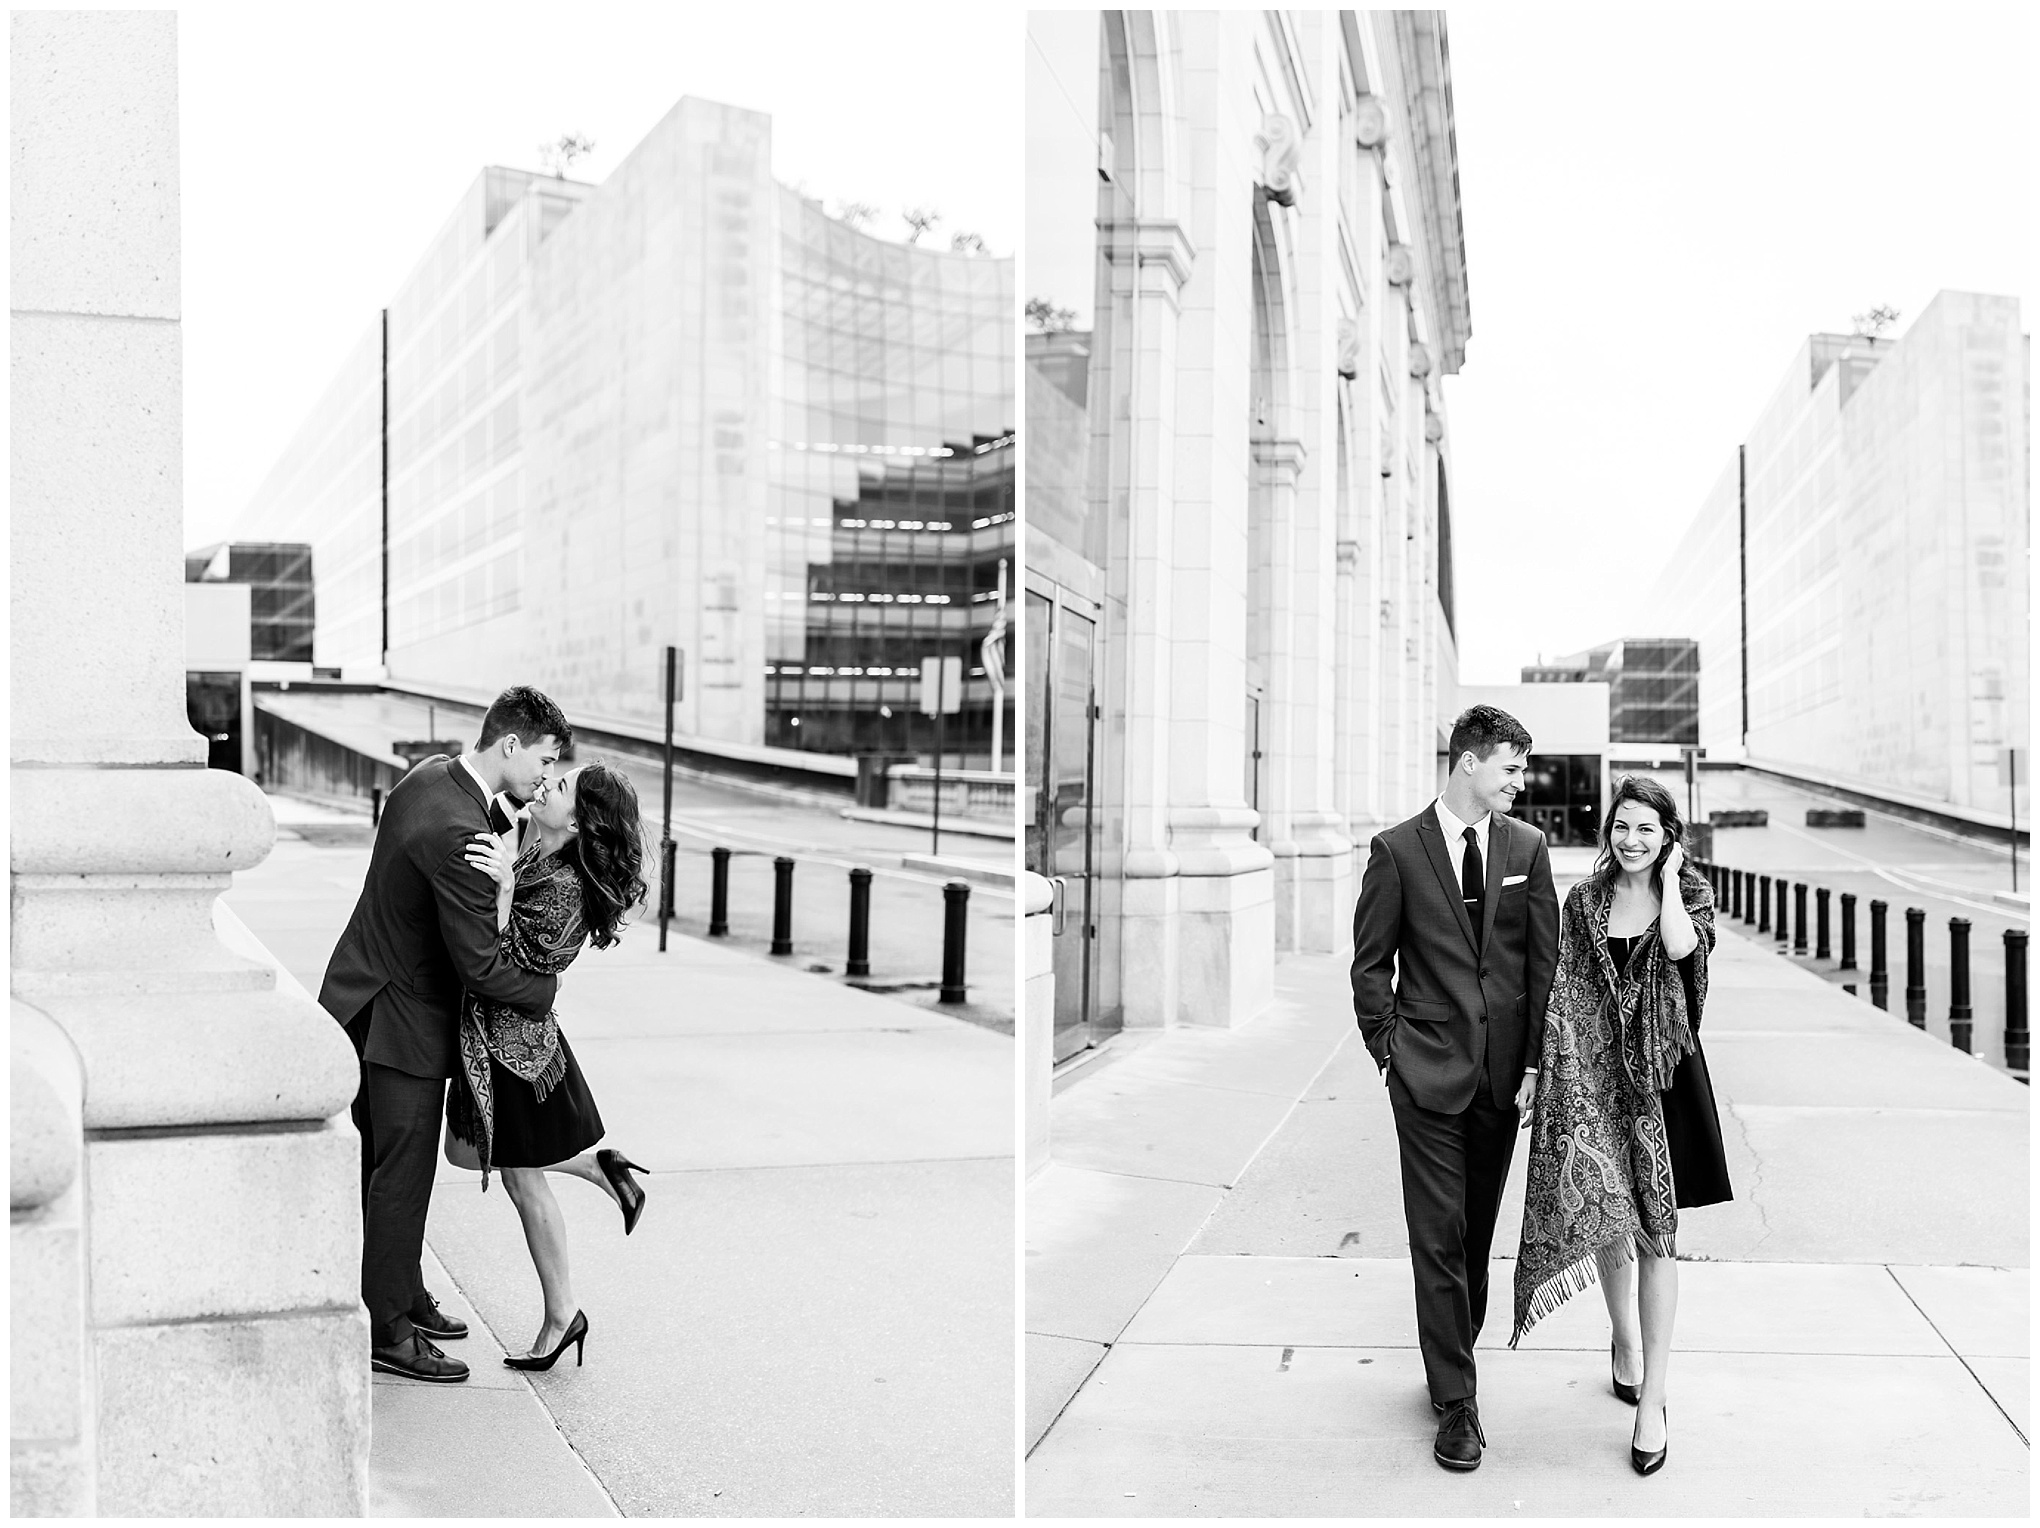 black and white engagement photos, black and white photography, black and white photos, engagement photos, black and white D.C., D.C. engagement photos, classic engagement photos, traditional engagement photos, engagement photos poses, classic architecture, D.C. architecture, Union Station D.C., Union Station, engaged couple, relationship goals, joyful couple, black and white sessions, couple walking together, about to kiss, paisley shawl